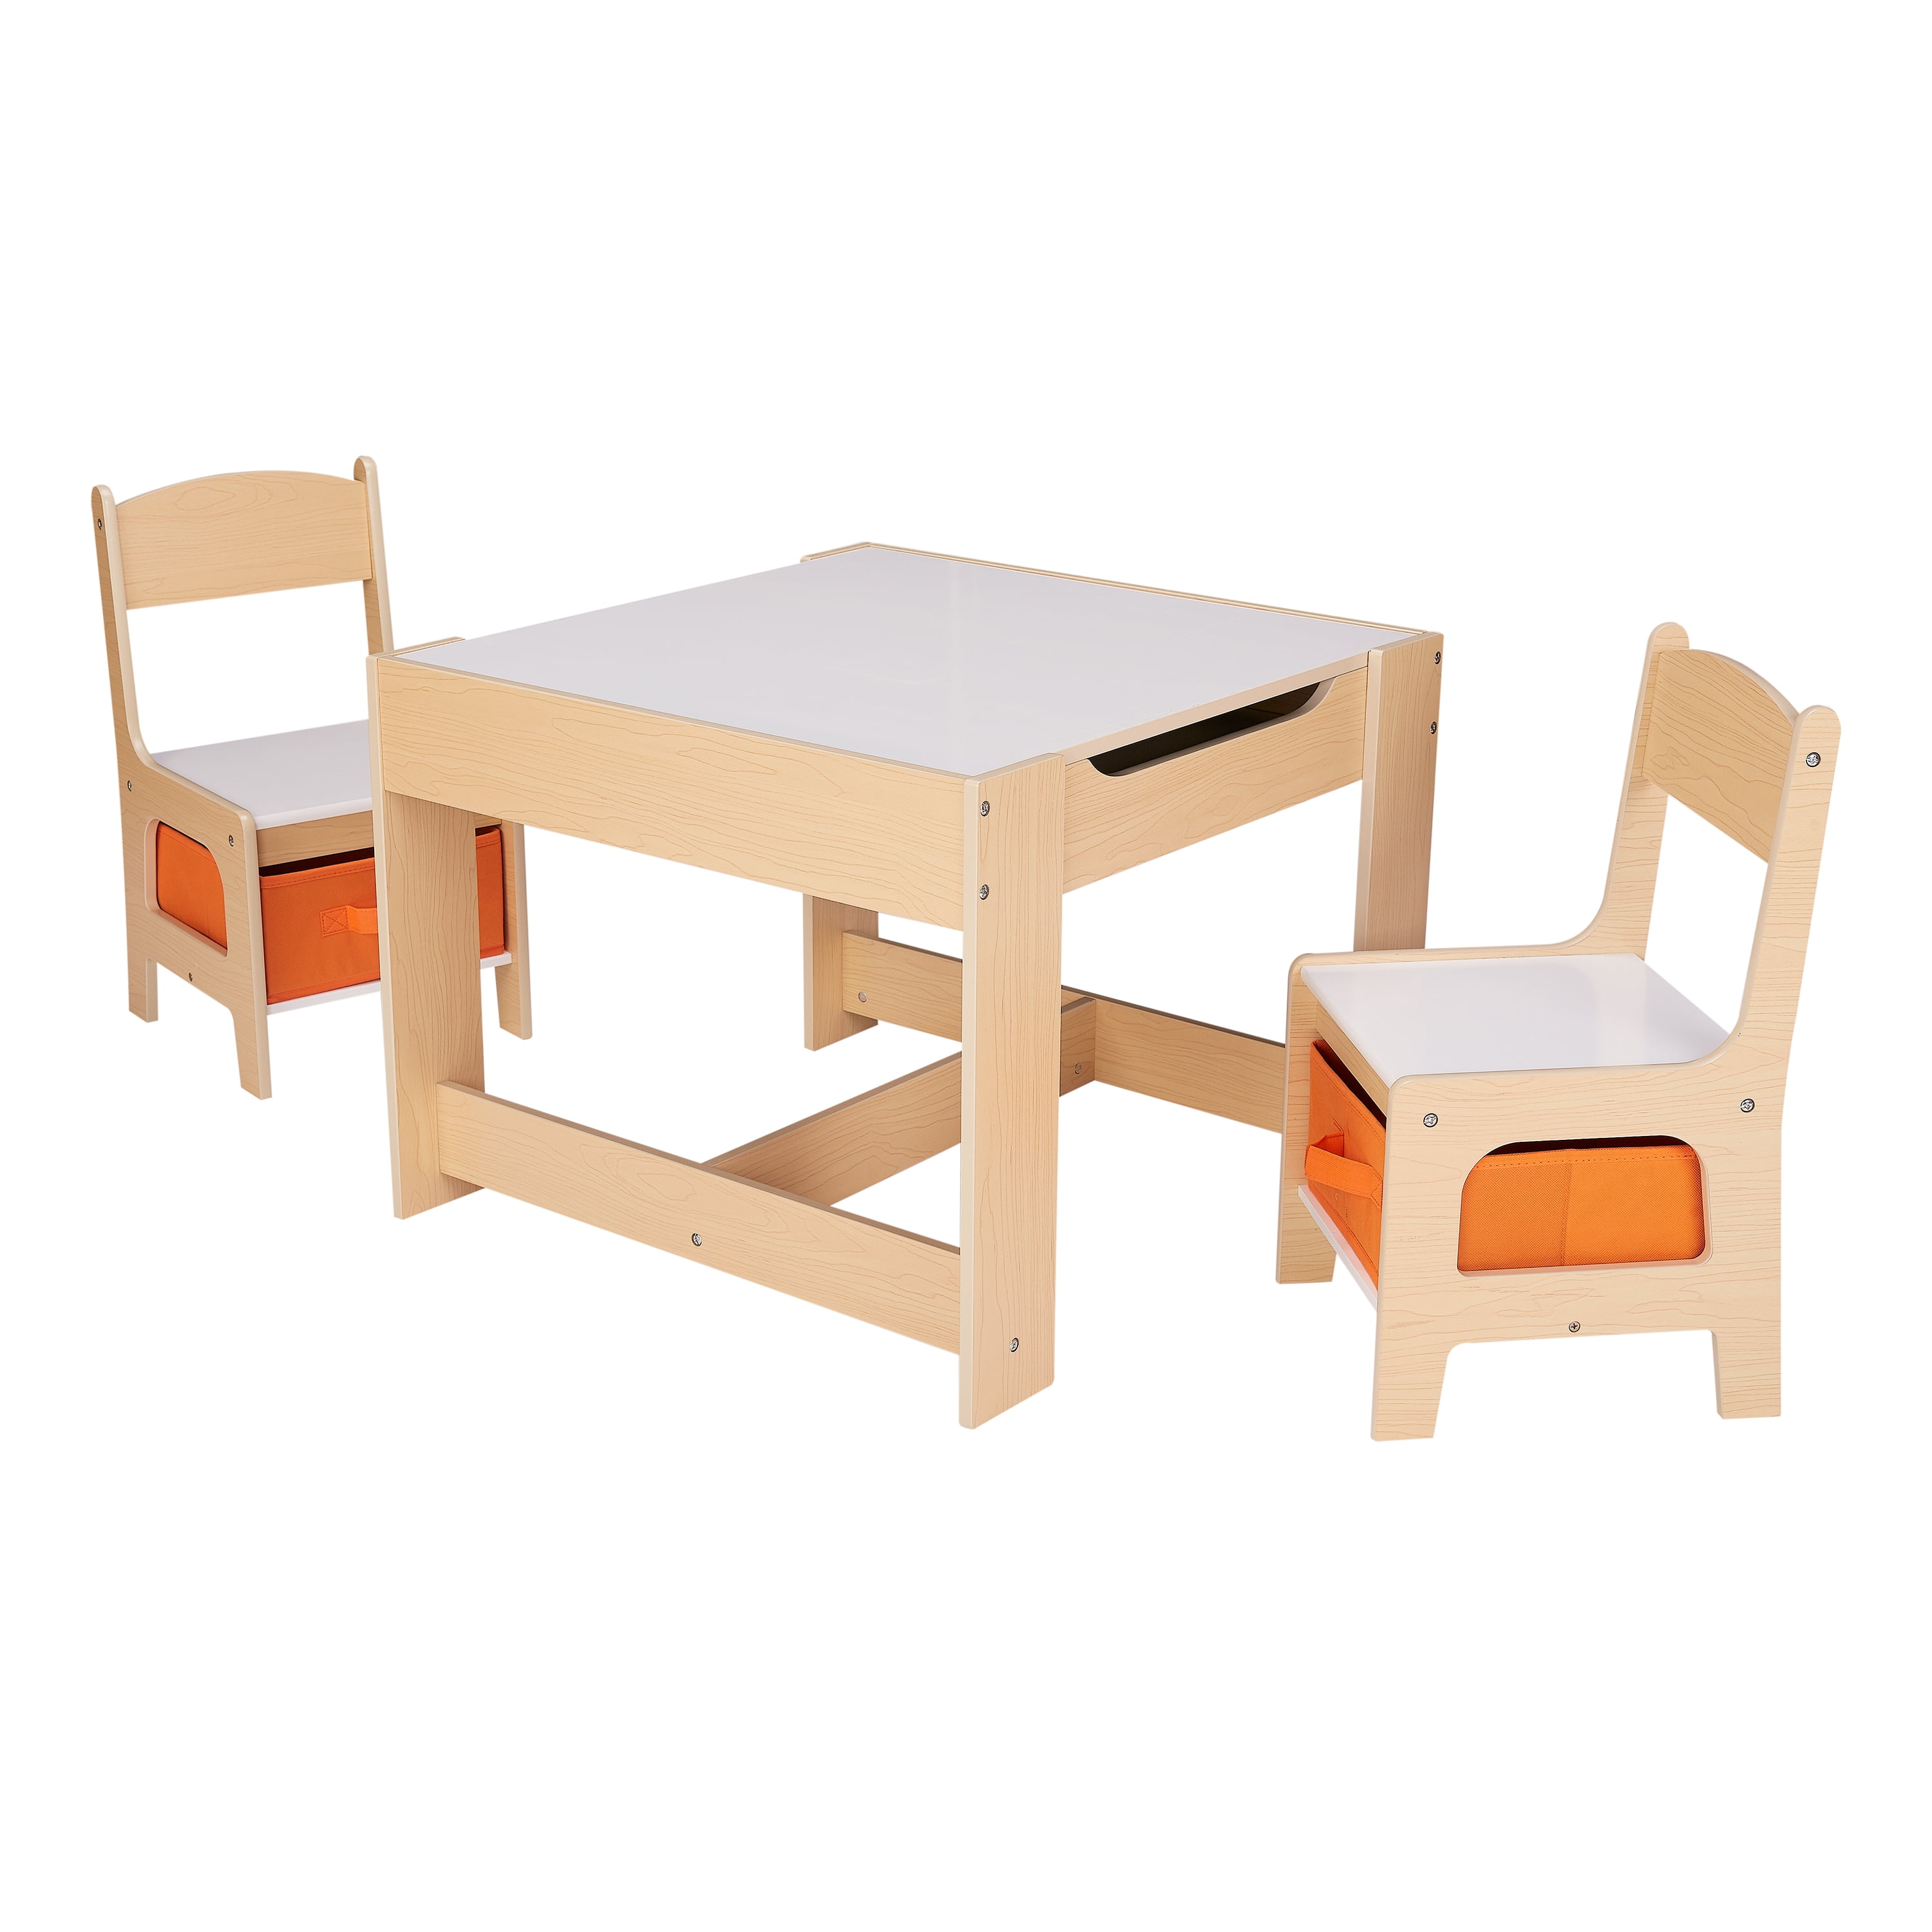 Beyond doubt Counting insects Believer Senda Kids Wooden Storage Table and Chairs Set, Natural Color, Melamine, 3  Piece - Walmart.com